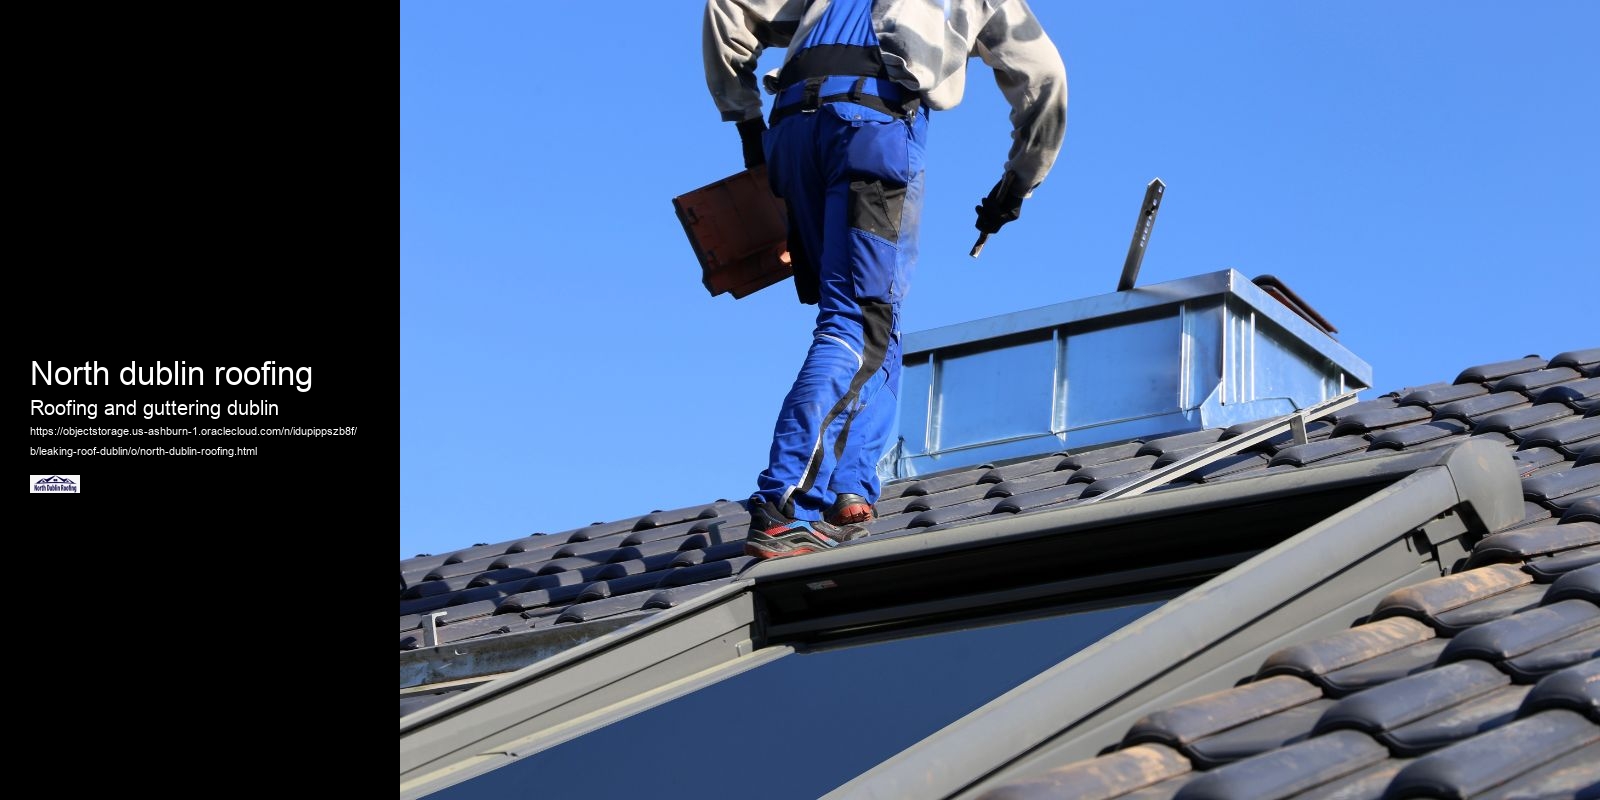 North dublin roofing